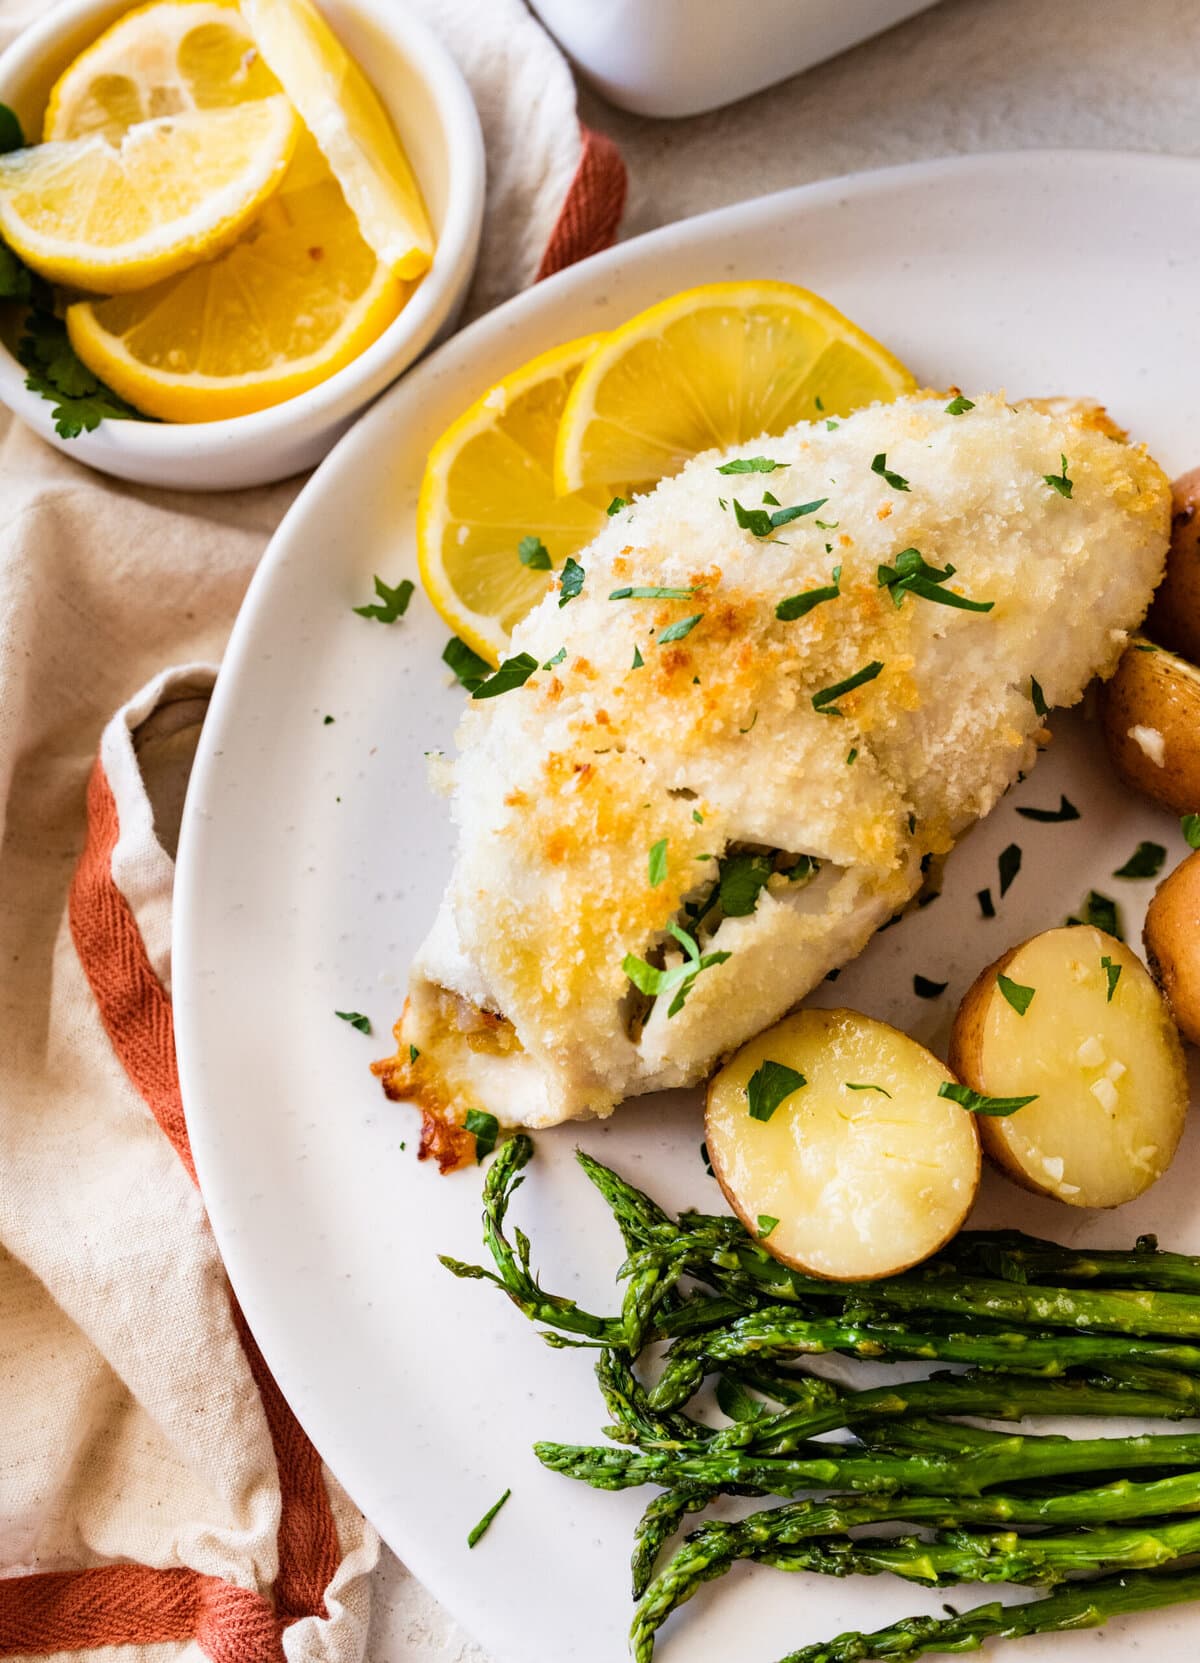 baked stuffed flounder on a plate with lemon wedges. potatoes and asparagus on a plate.